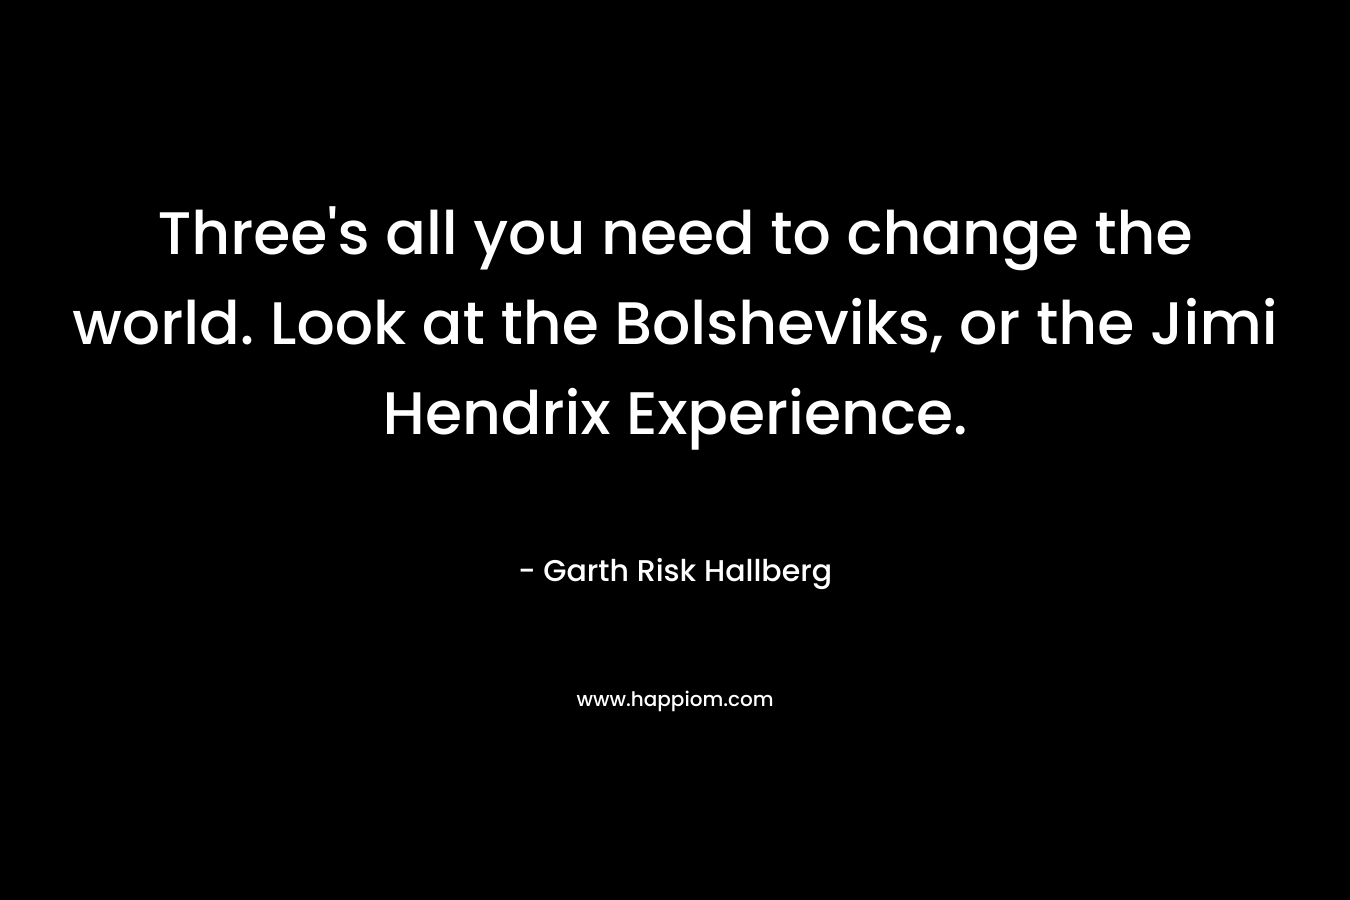 Three's all you need to change the world. Look at the Bolsheviks, or the Jimi Hendrix Experience.